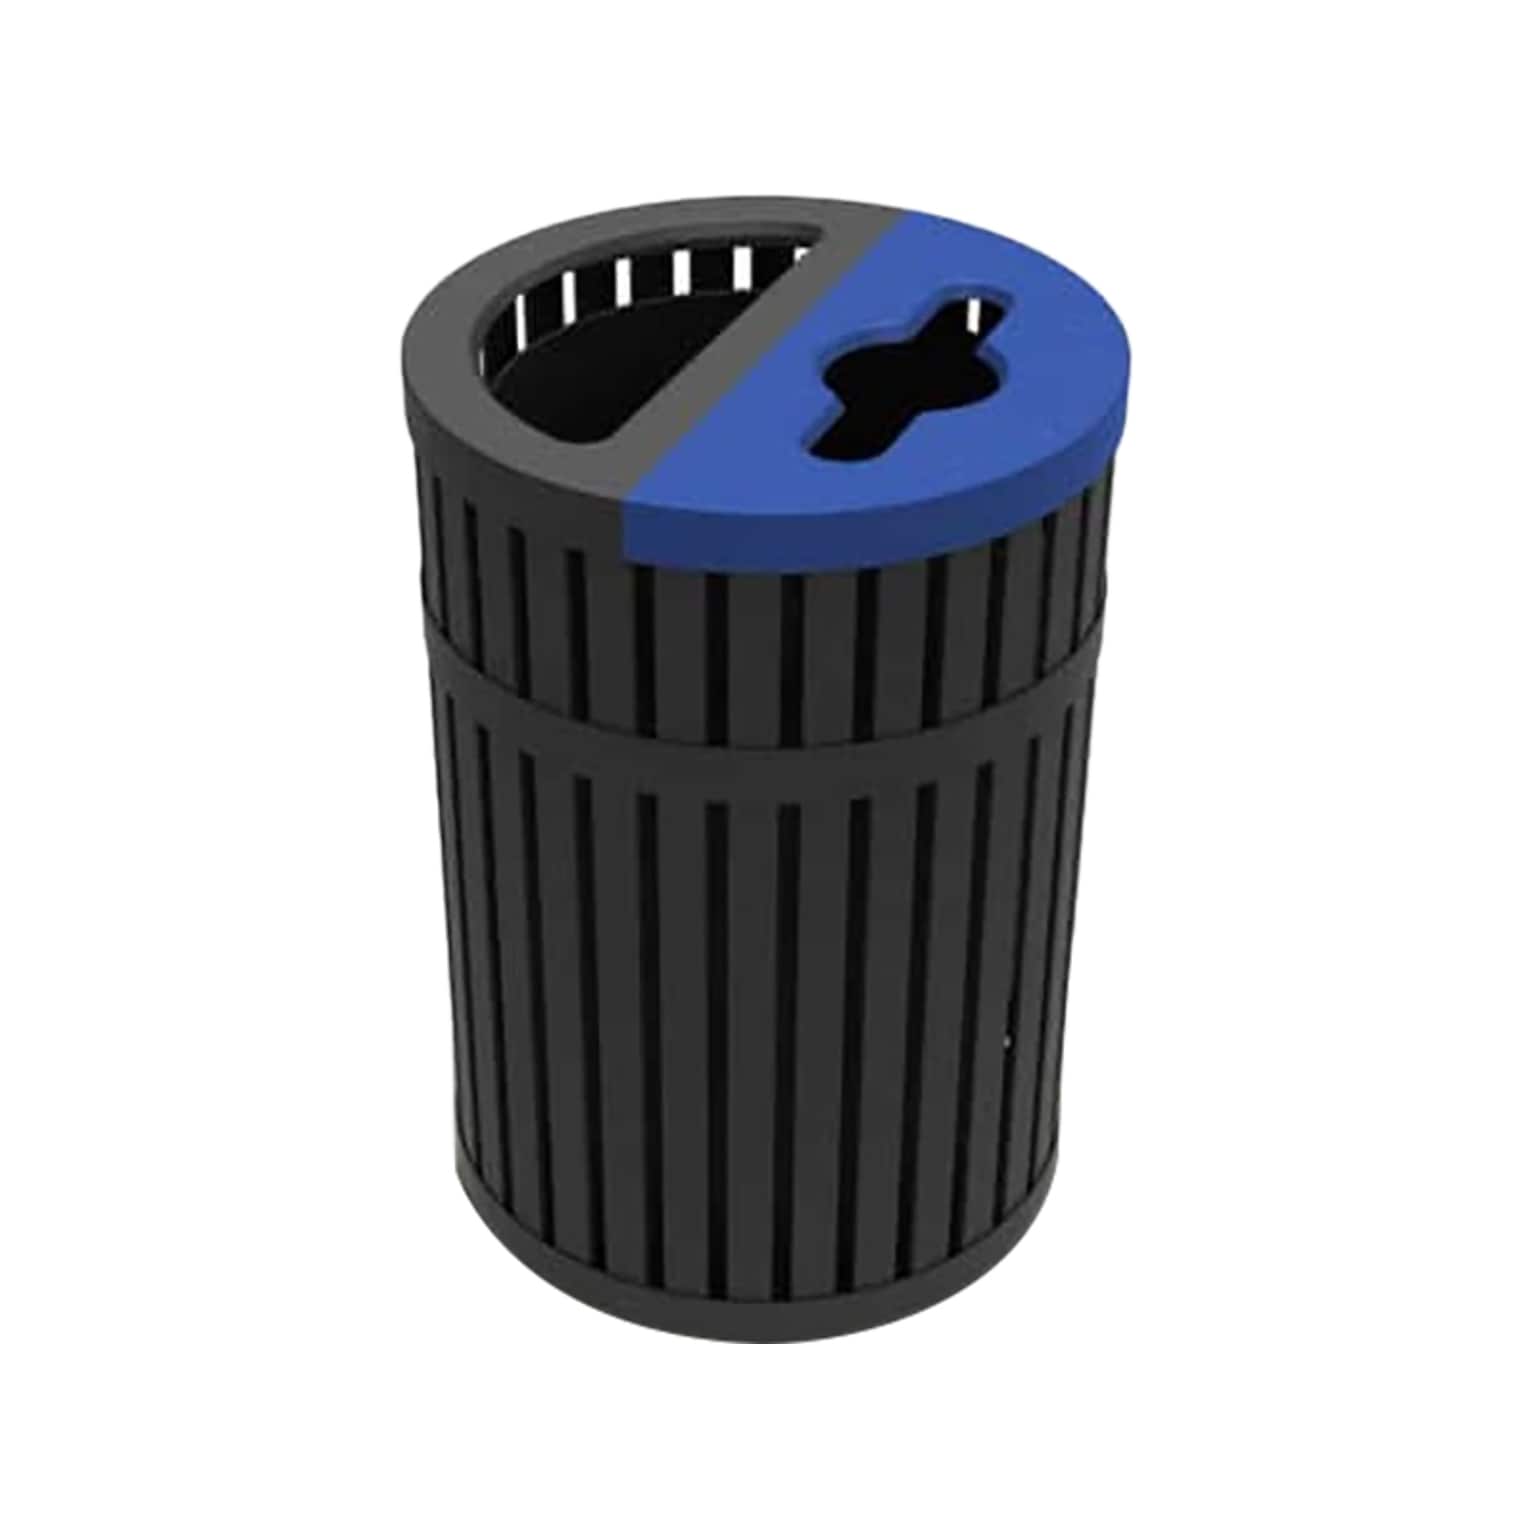 Commercial Zone ArchTec Series Parkview 4 Steel Trash Can with no Lid, Black/Blue, 45 Gal. (728501)